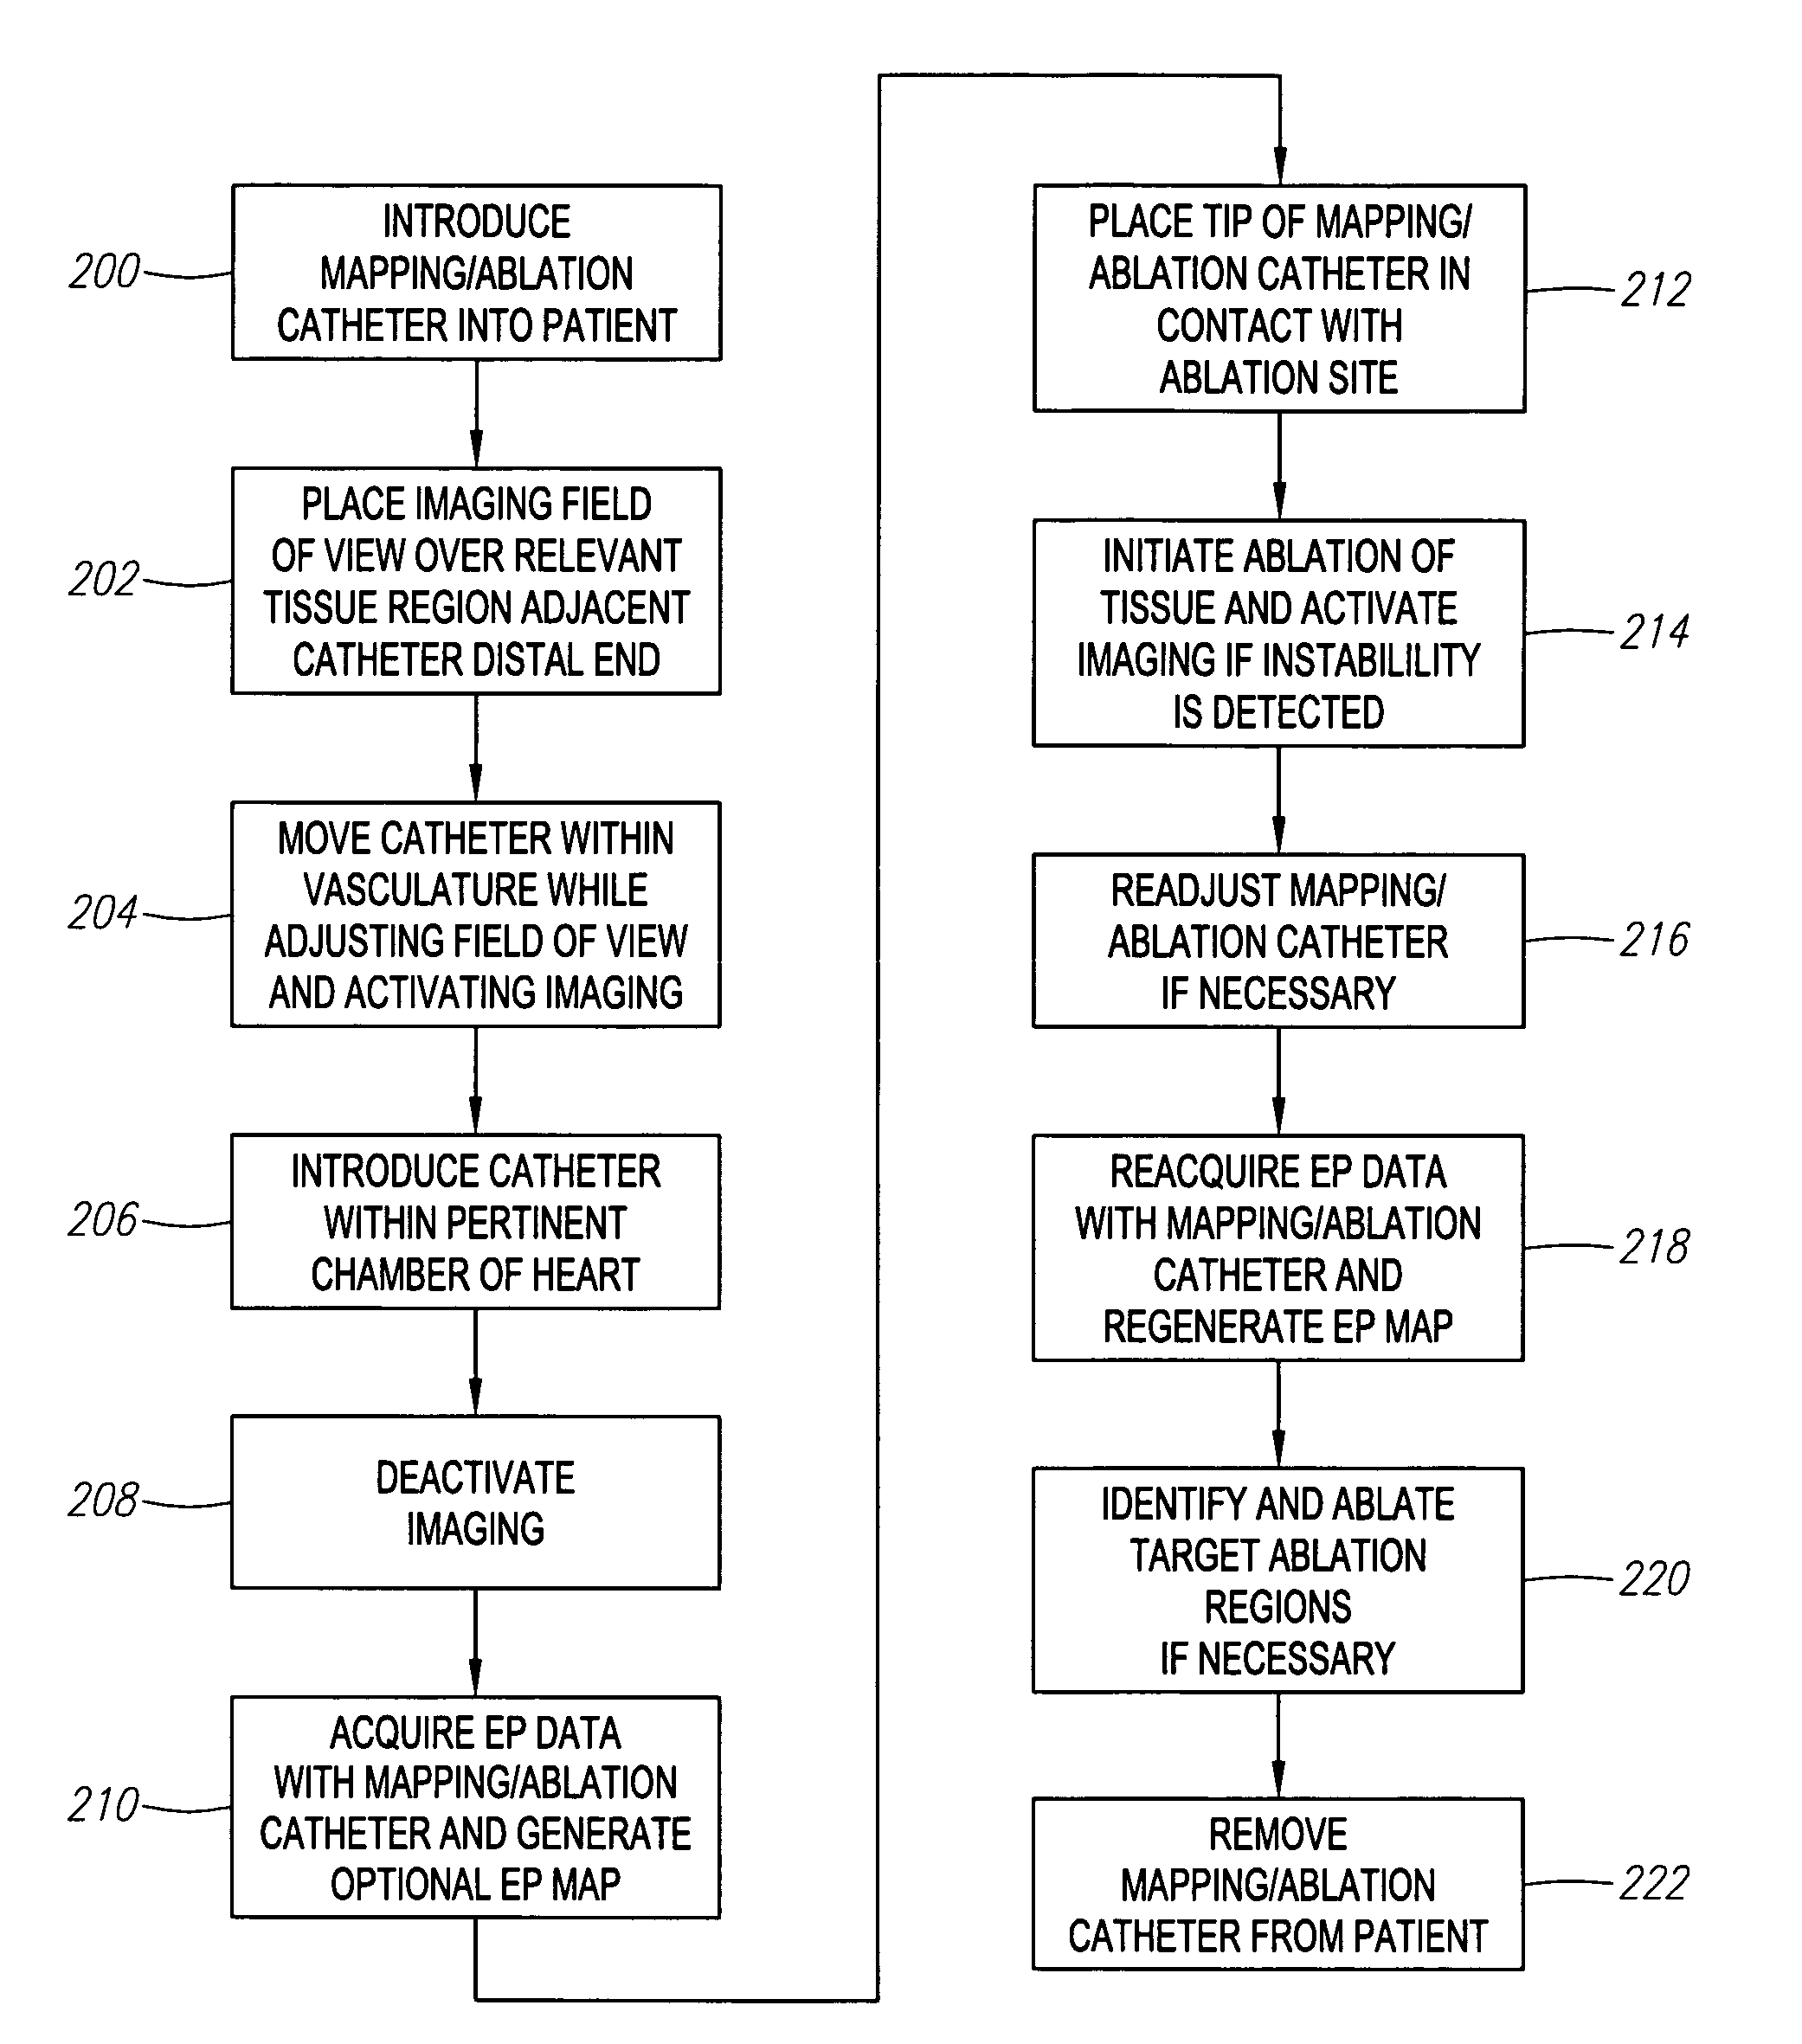 Automated activation/deactivation of imaging device based on tracked medical device position